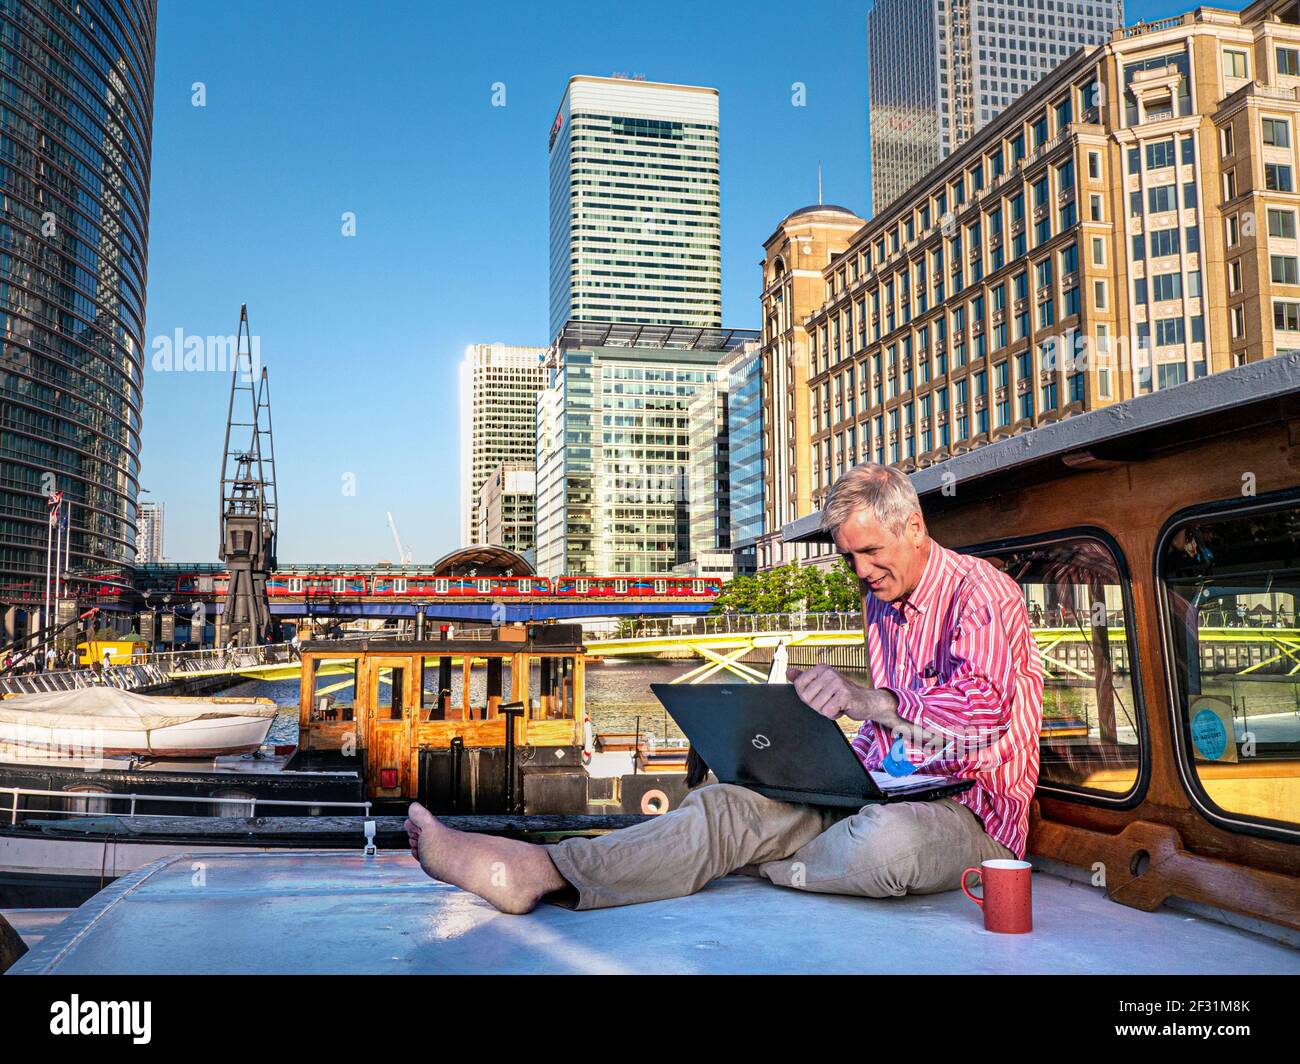 Home working mature man 50-55 outside on his houseboat barge, working on his computer contrasted with the surroundings of office buildings, hotels and cross rail tube train in background. Canary Wharf London UK.  Telecommuting, also called remote working, future of work, telework, teleworking, working from home, mobile work, remote job, work from anywhere, and flexible workplace, a work arrangement in which employees do not commute or travel to a central place of work, such as an office building, warehouse, or store. Stock Photo